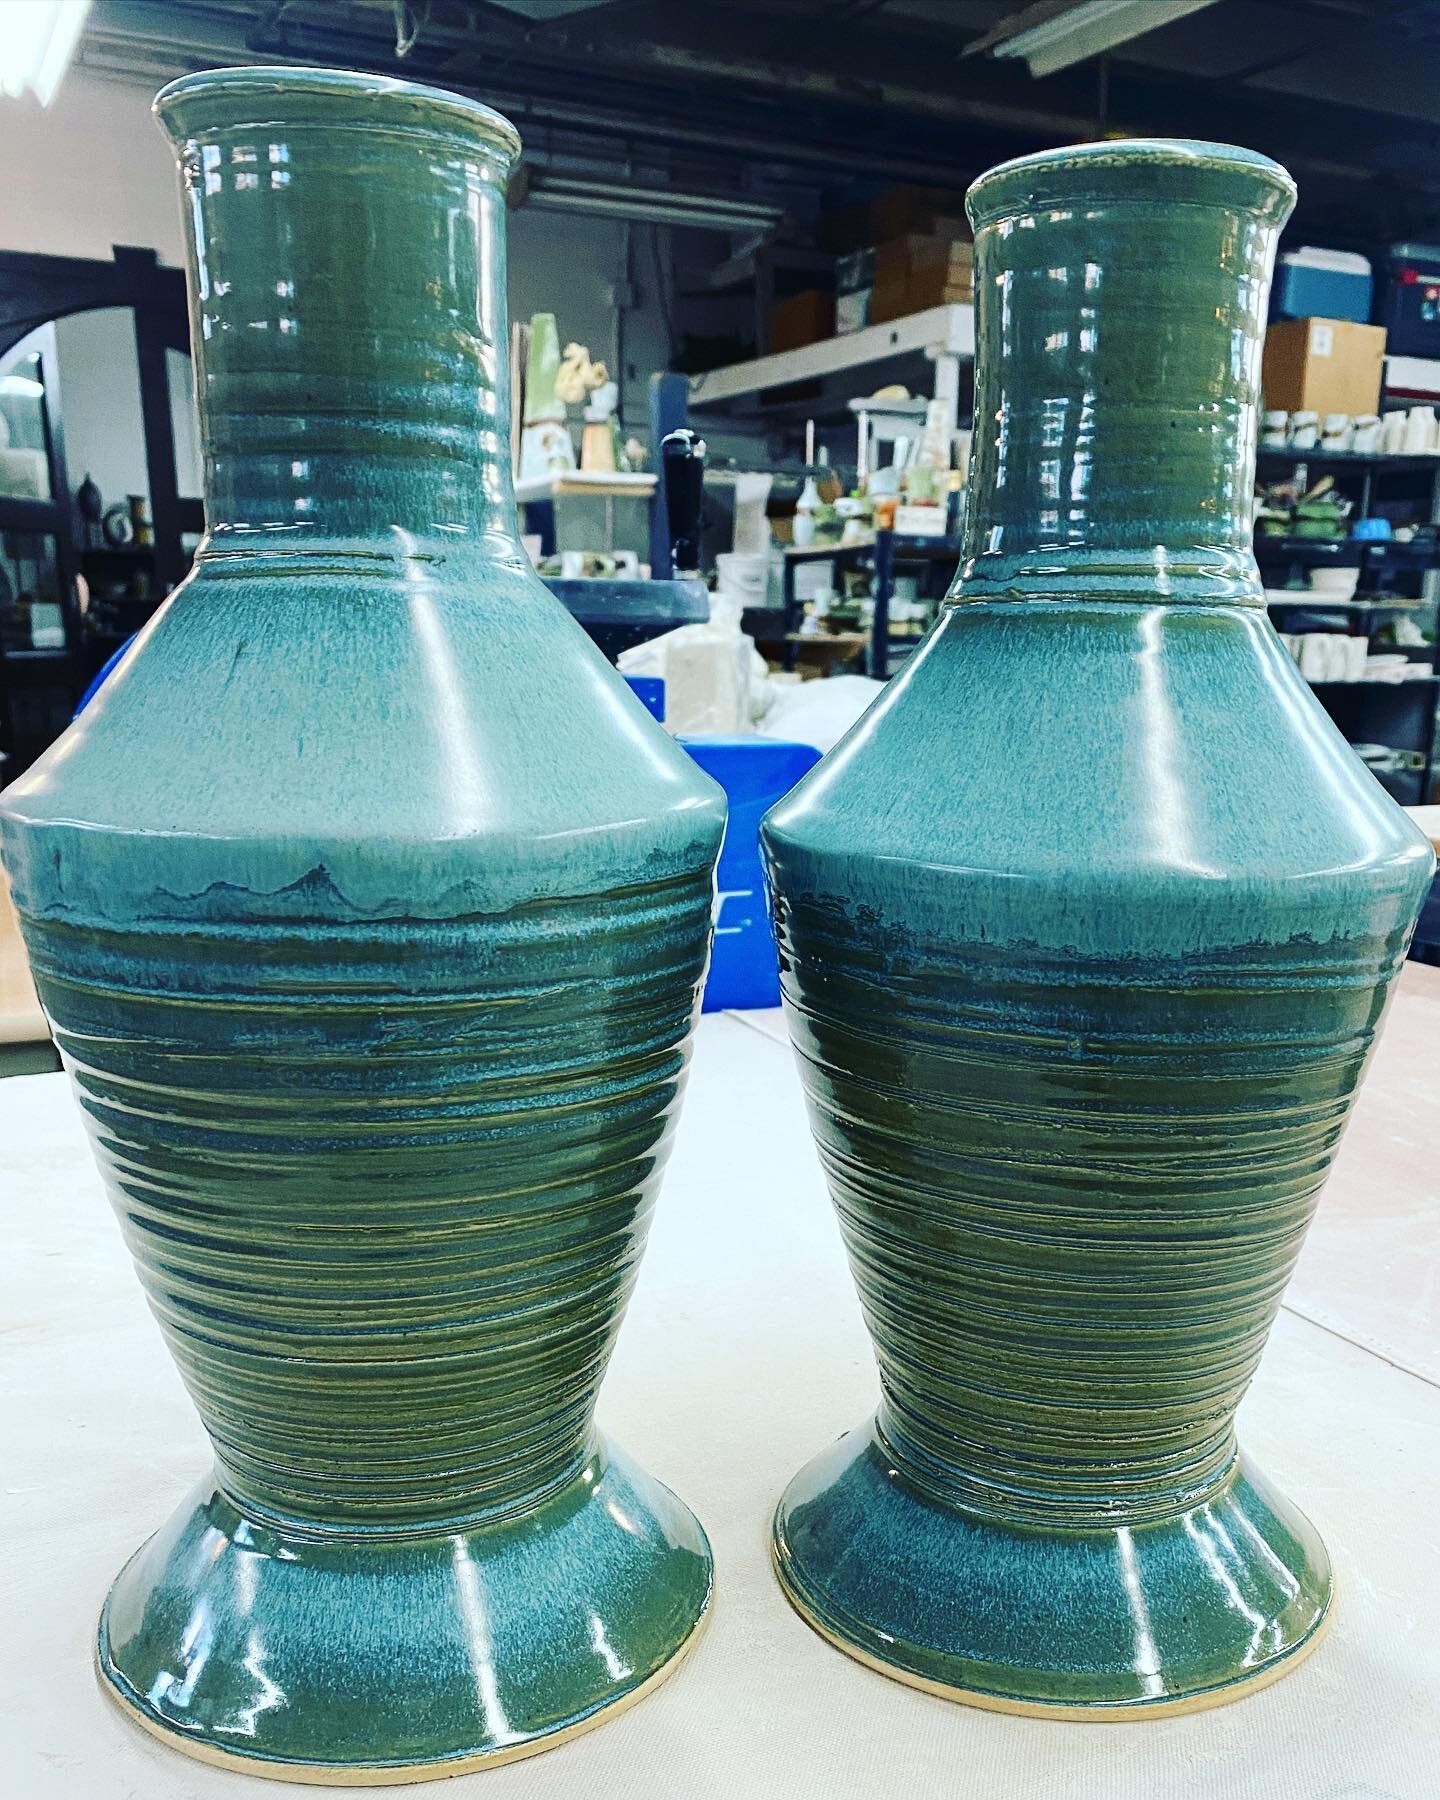 Lamp bases! Thrown in two parts and attached when leather-hard. Made of stoneware, fired to cone 6 and glazed with @opulenceglaze Smoky Mountain Mist. These beauties were commissioned and designed by a fabulous local interior designer. I cant wait to